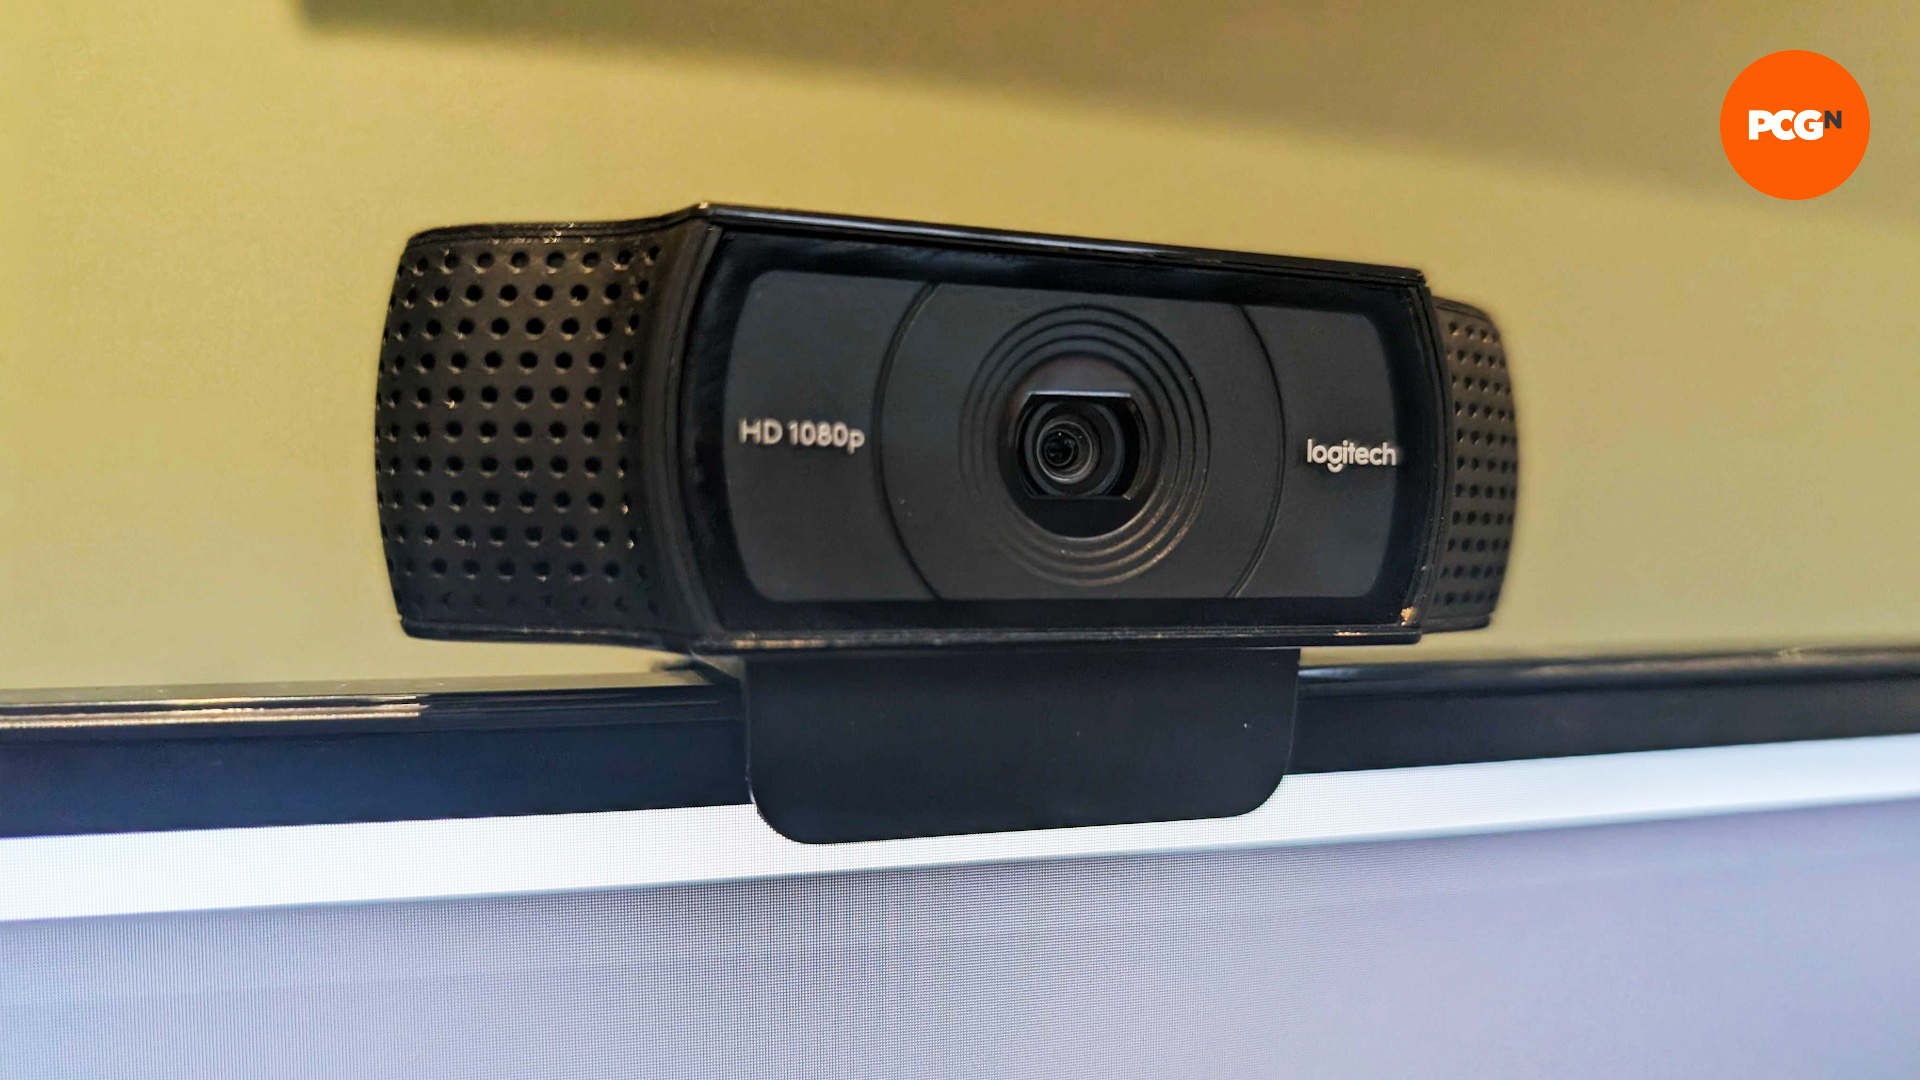 The Logitech C920 HD Pro webcam on top of a PC monitor